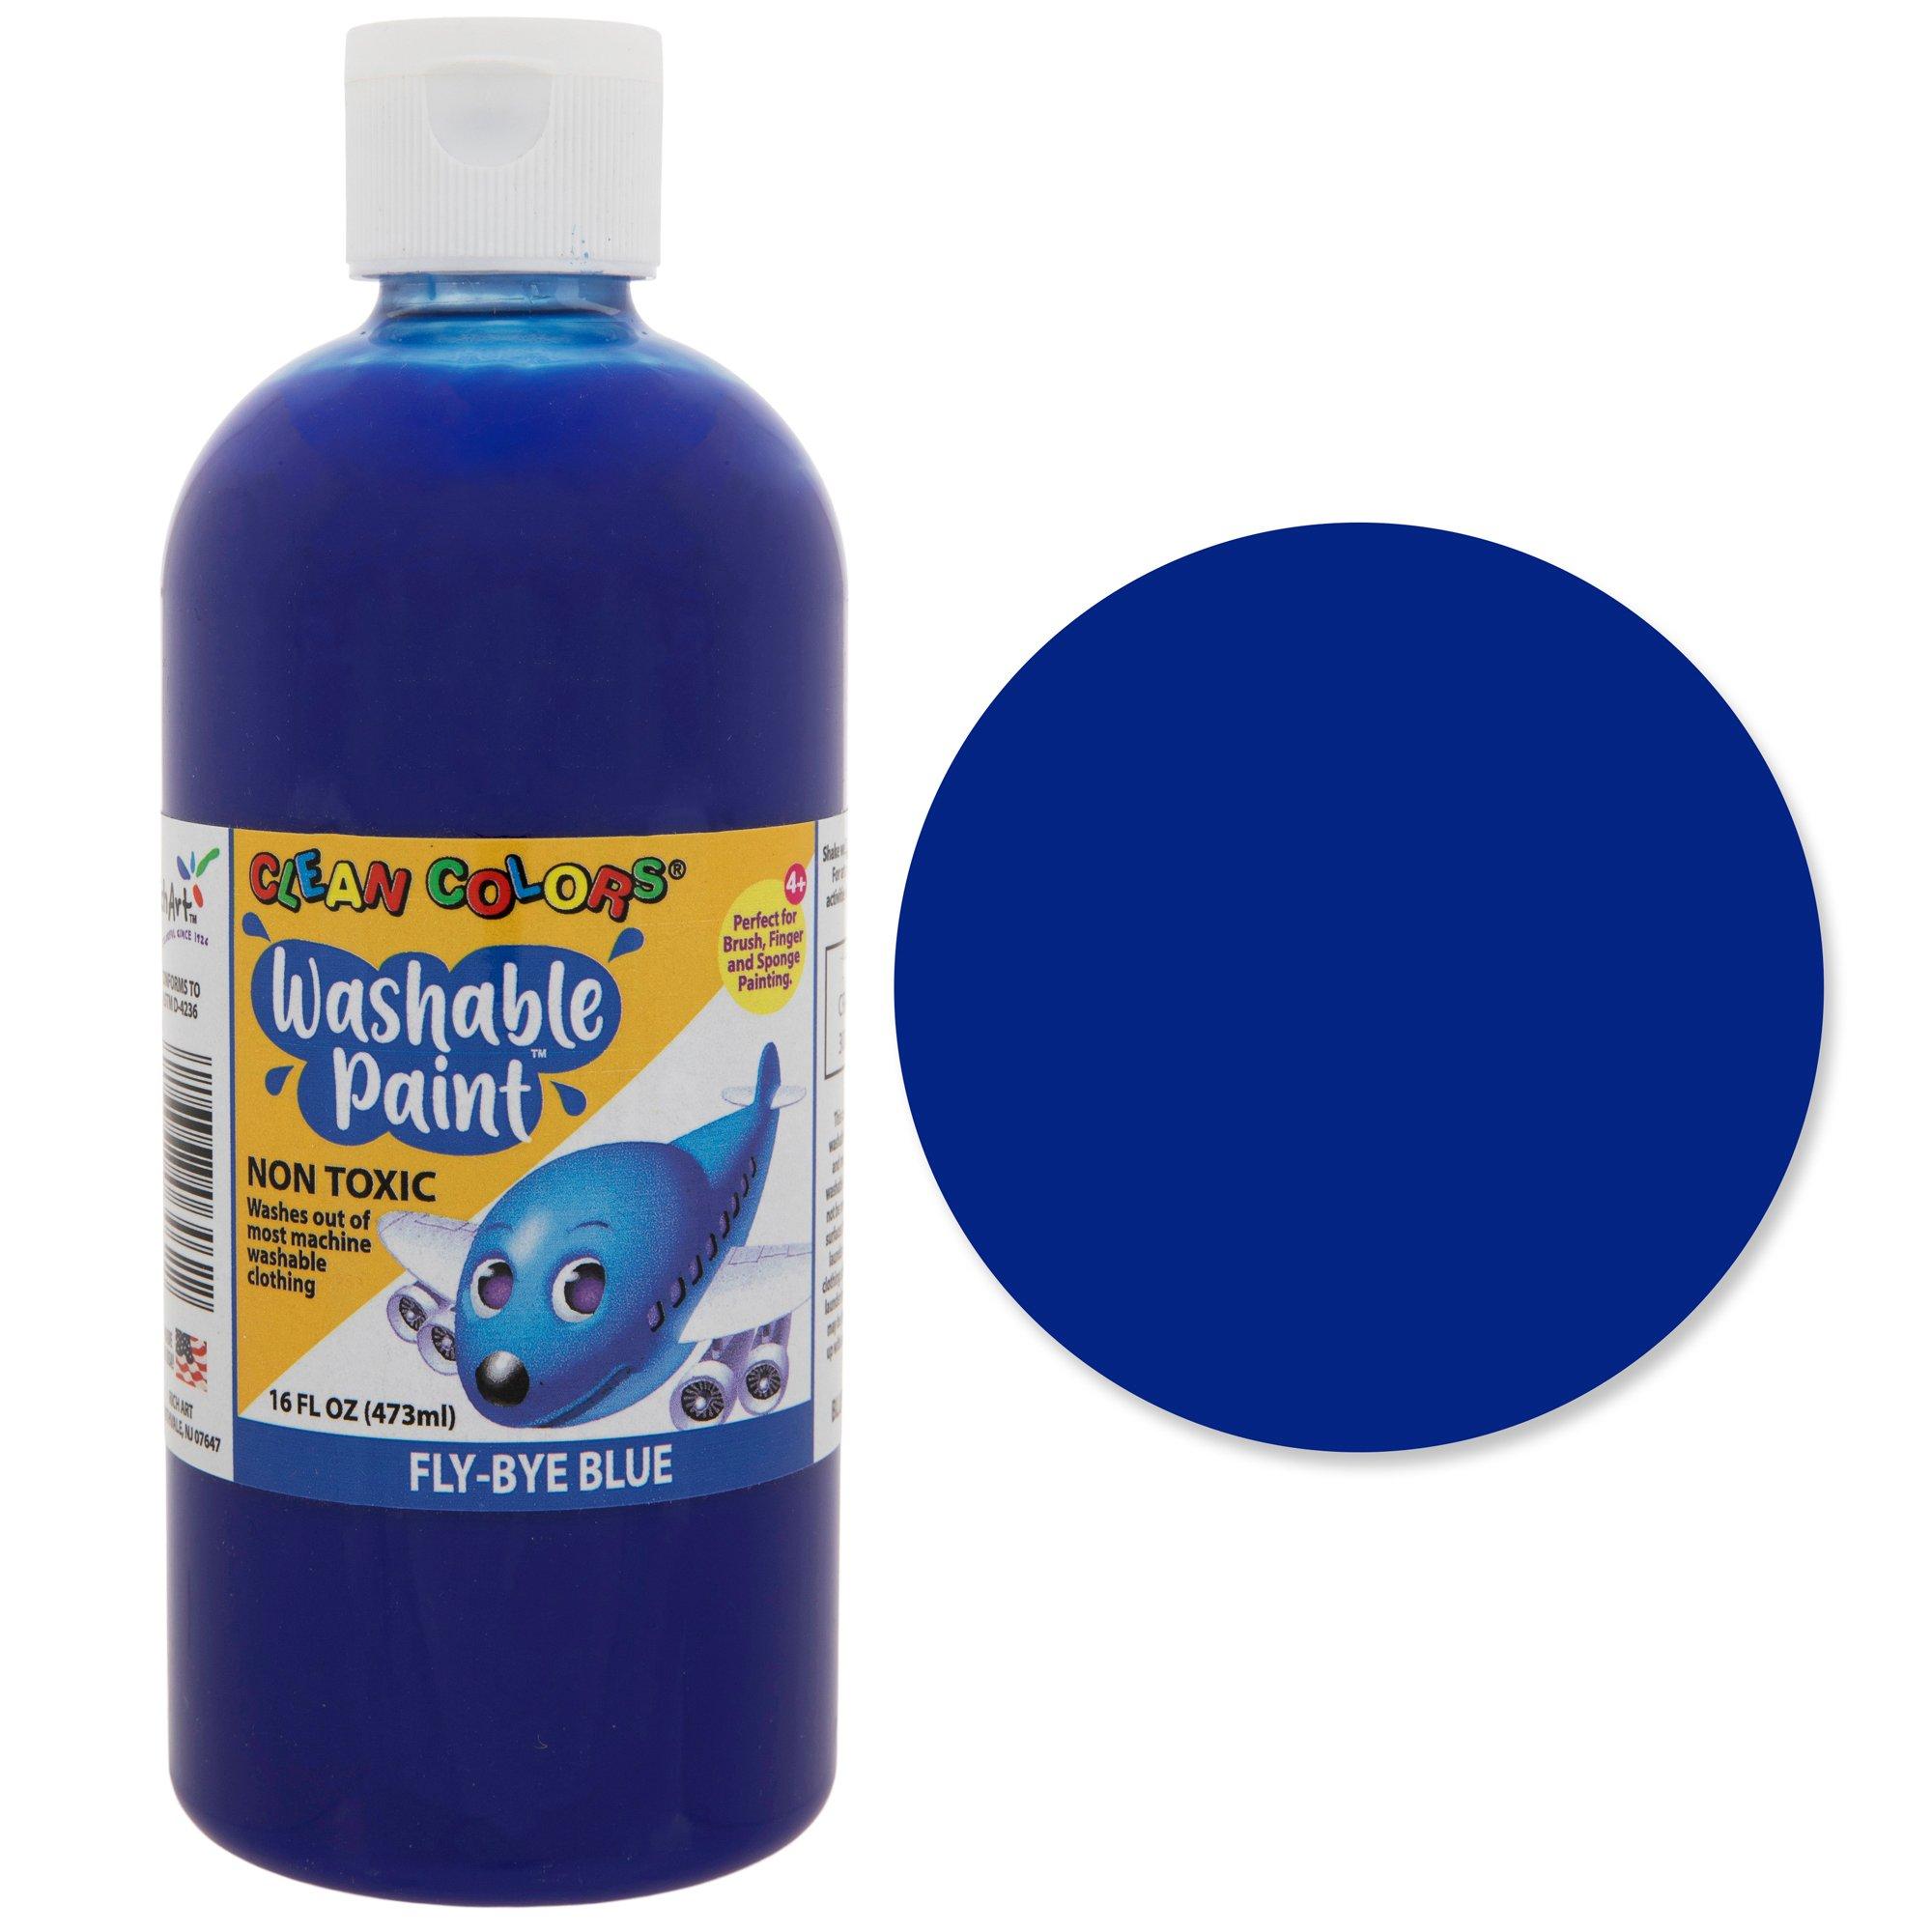 Hello Hobby Brand Washable Tempera Paint For Kids Arts and Crafts